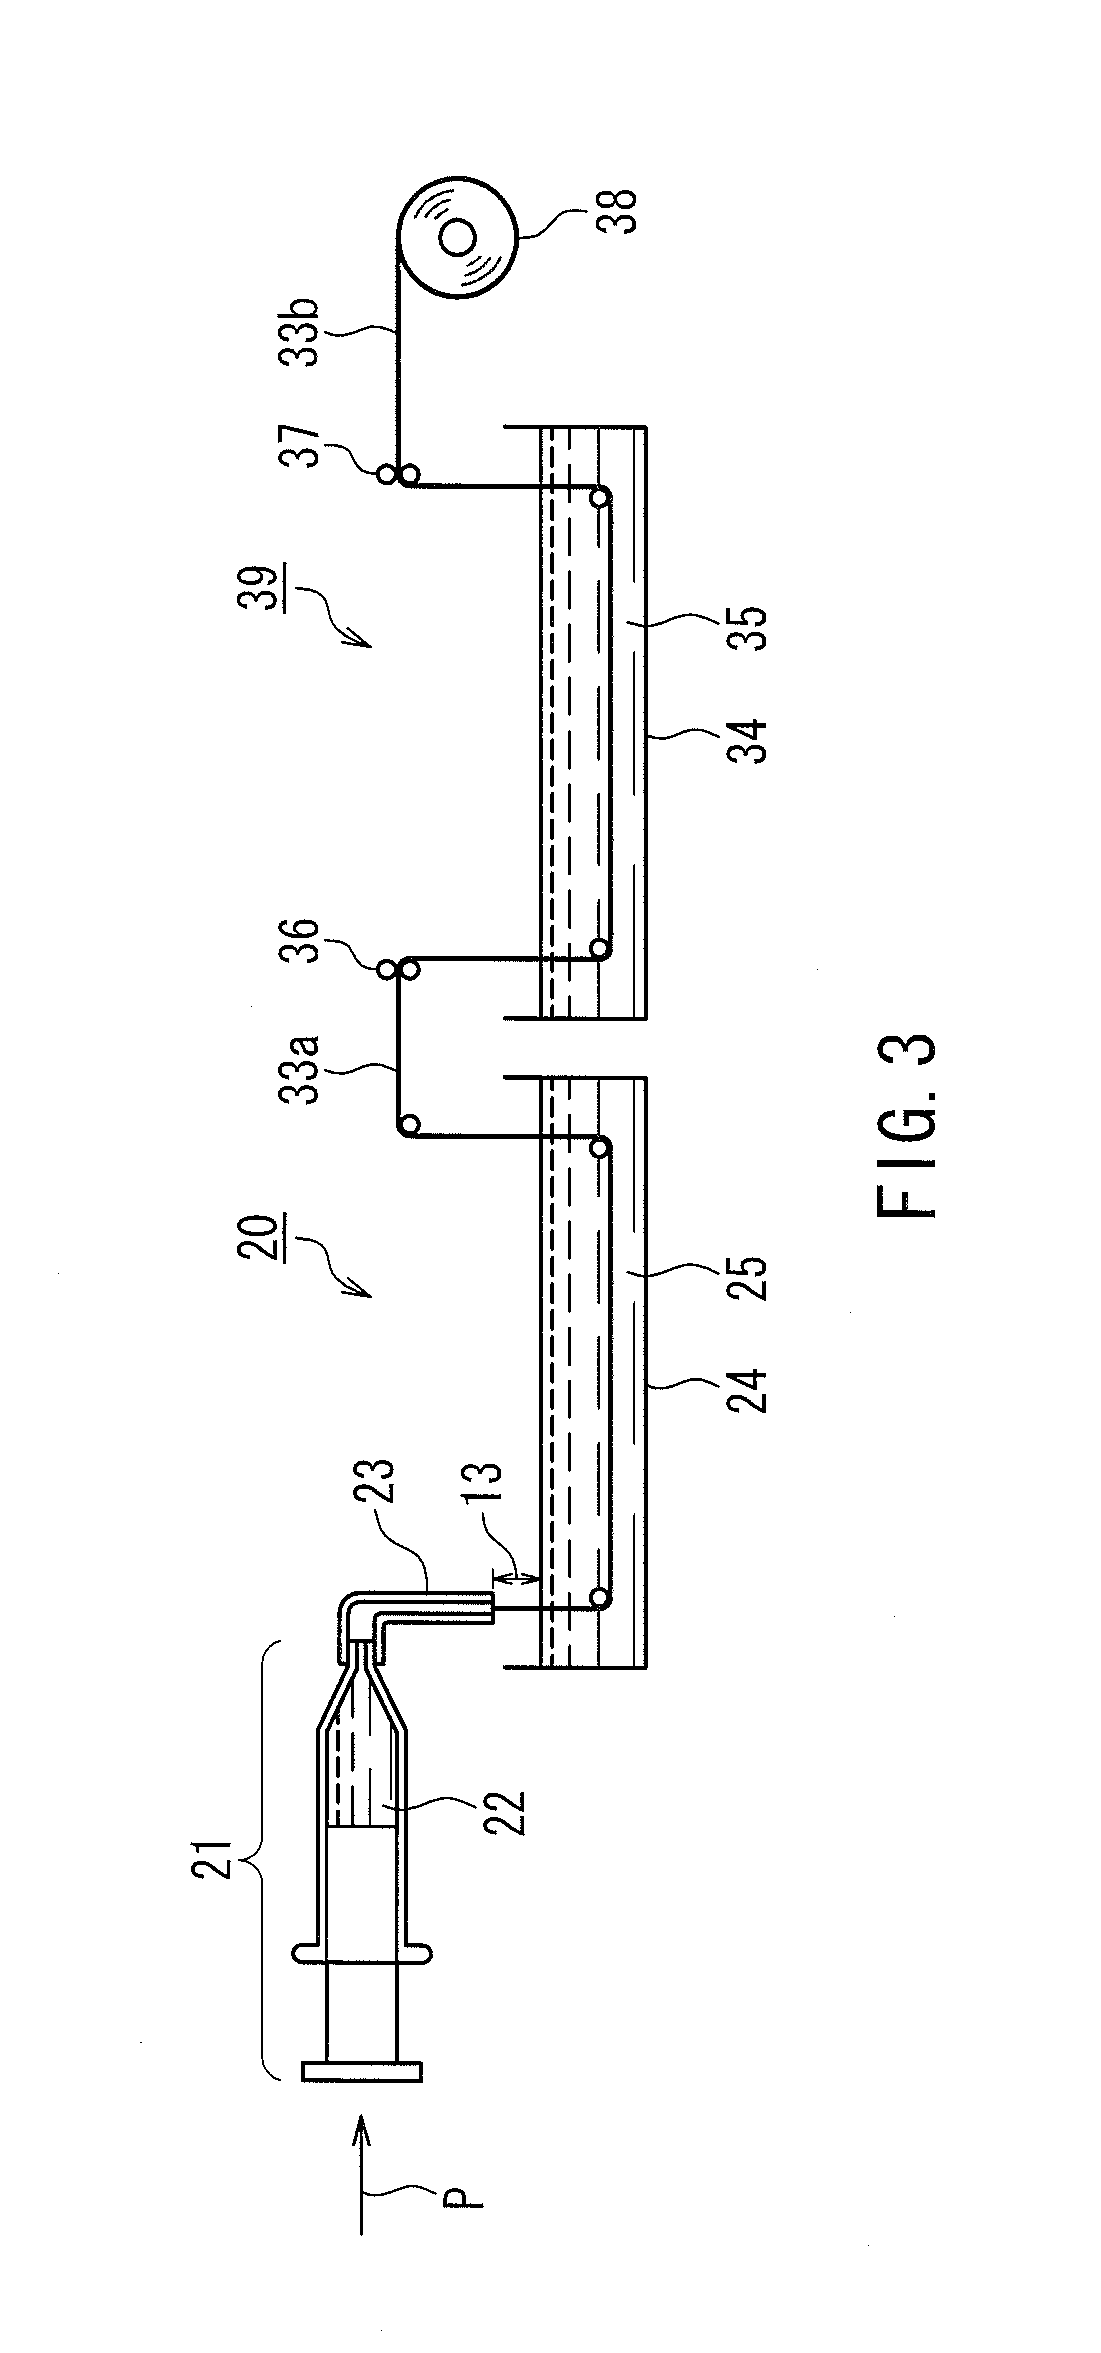 Solution-dyed protein fiber and method for producing same